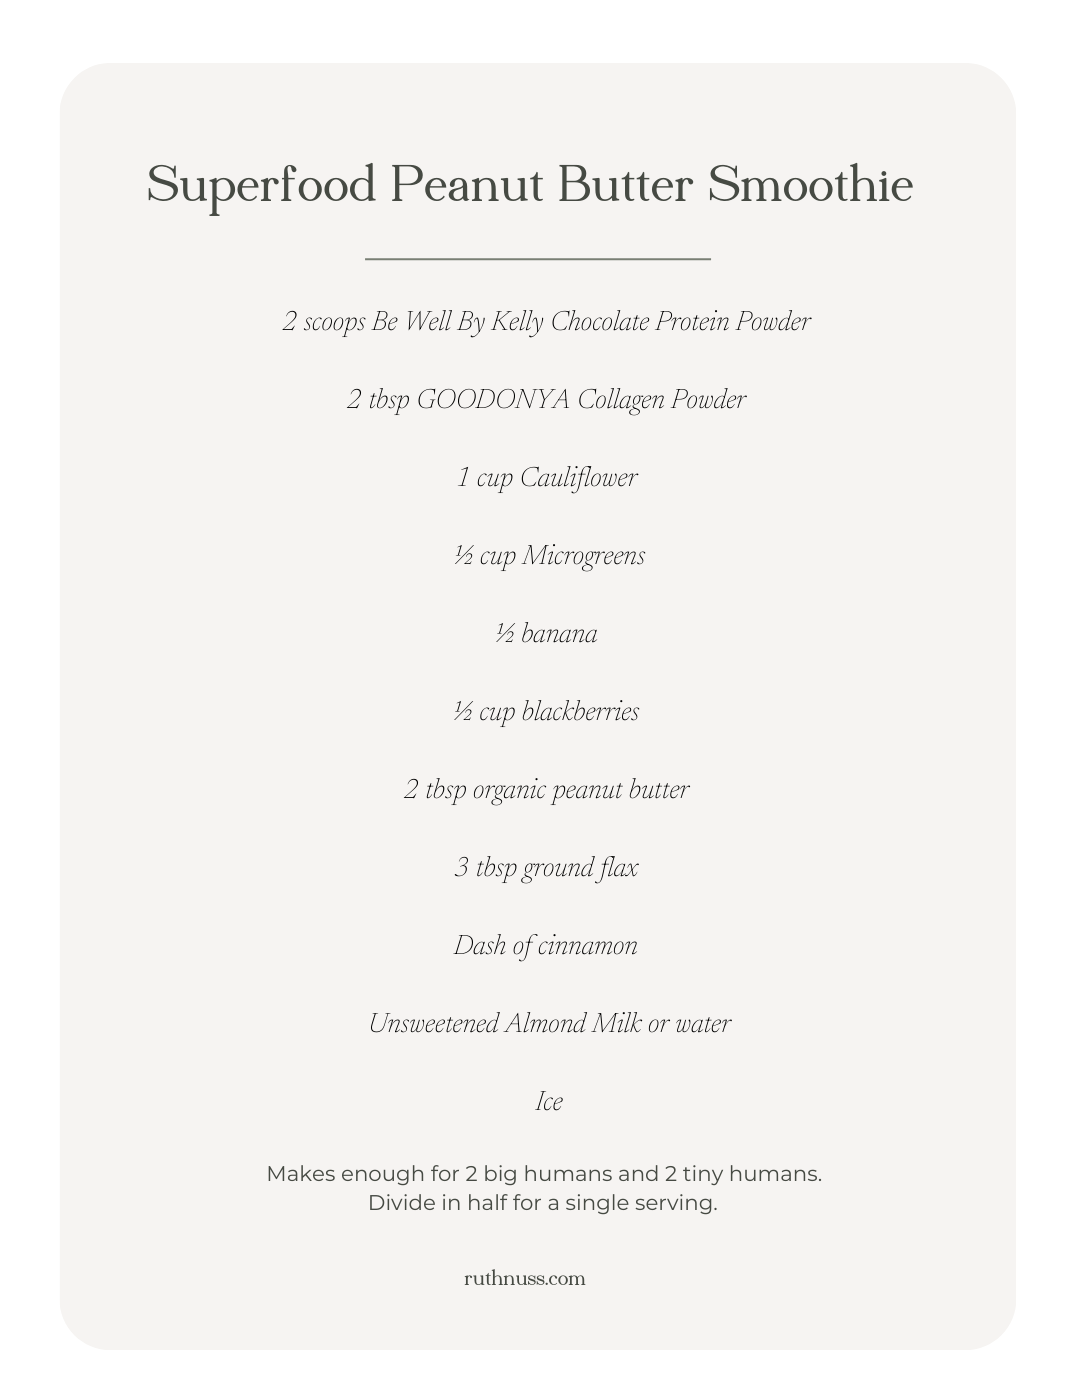 Superfood Peanut Butter Smoothie Recipe